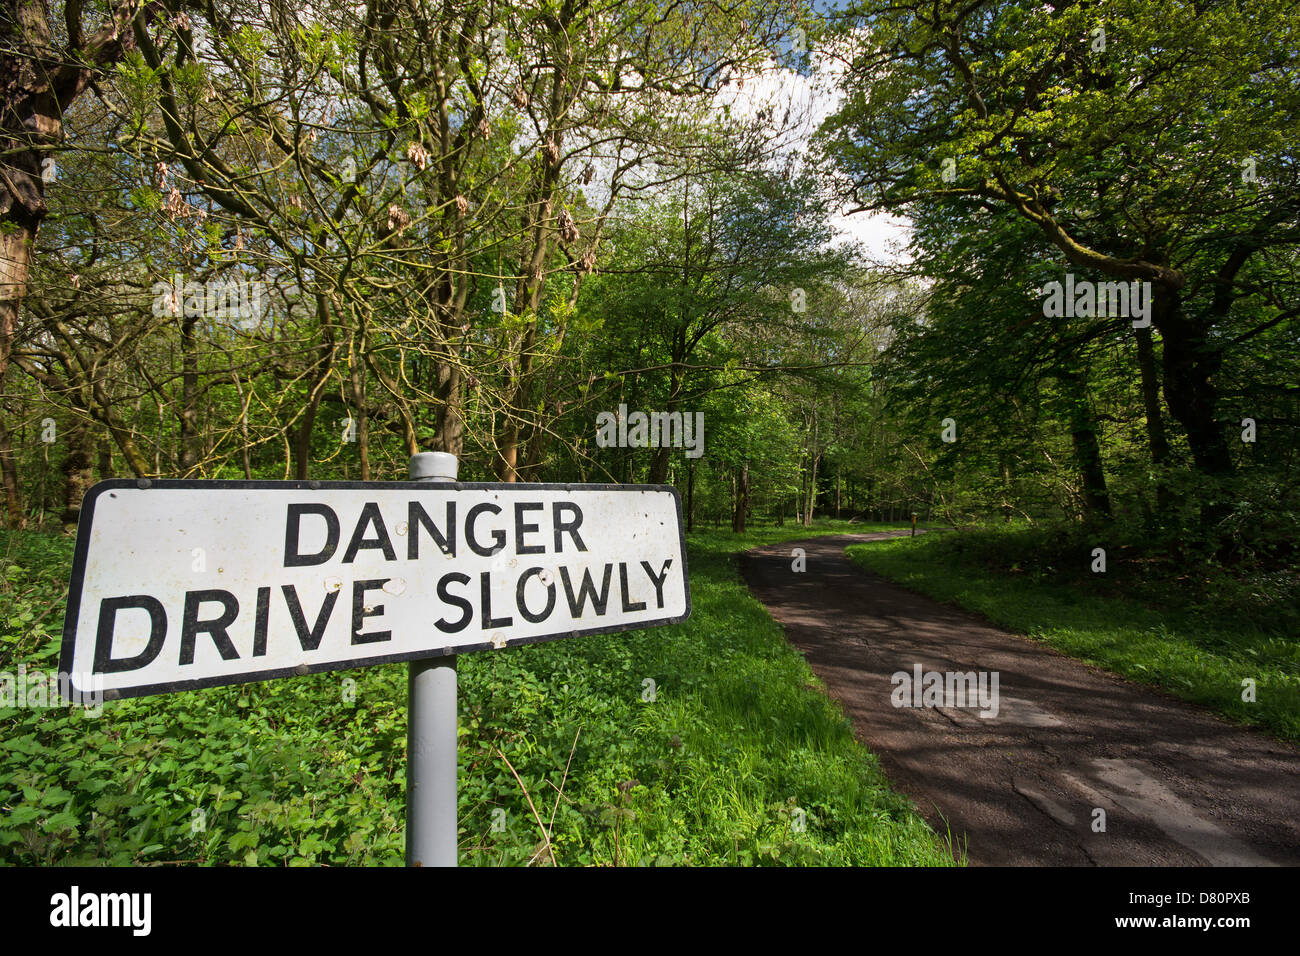 A sign warning motorists to drive slowly on a narrow country lane. UK, 2013. Stock Photo